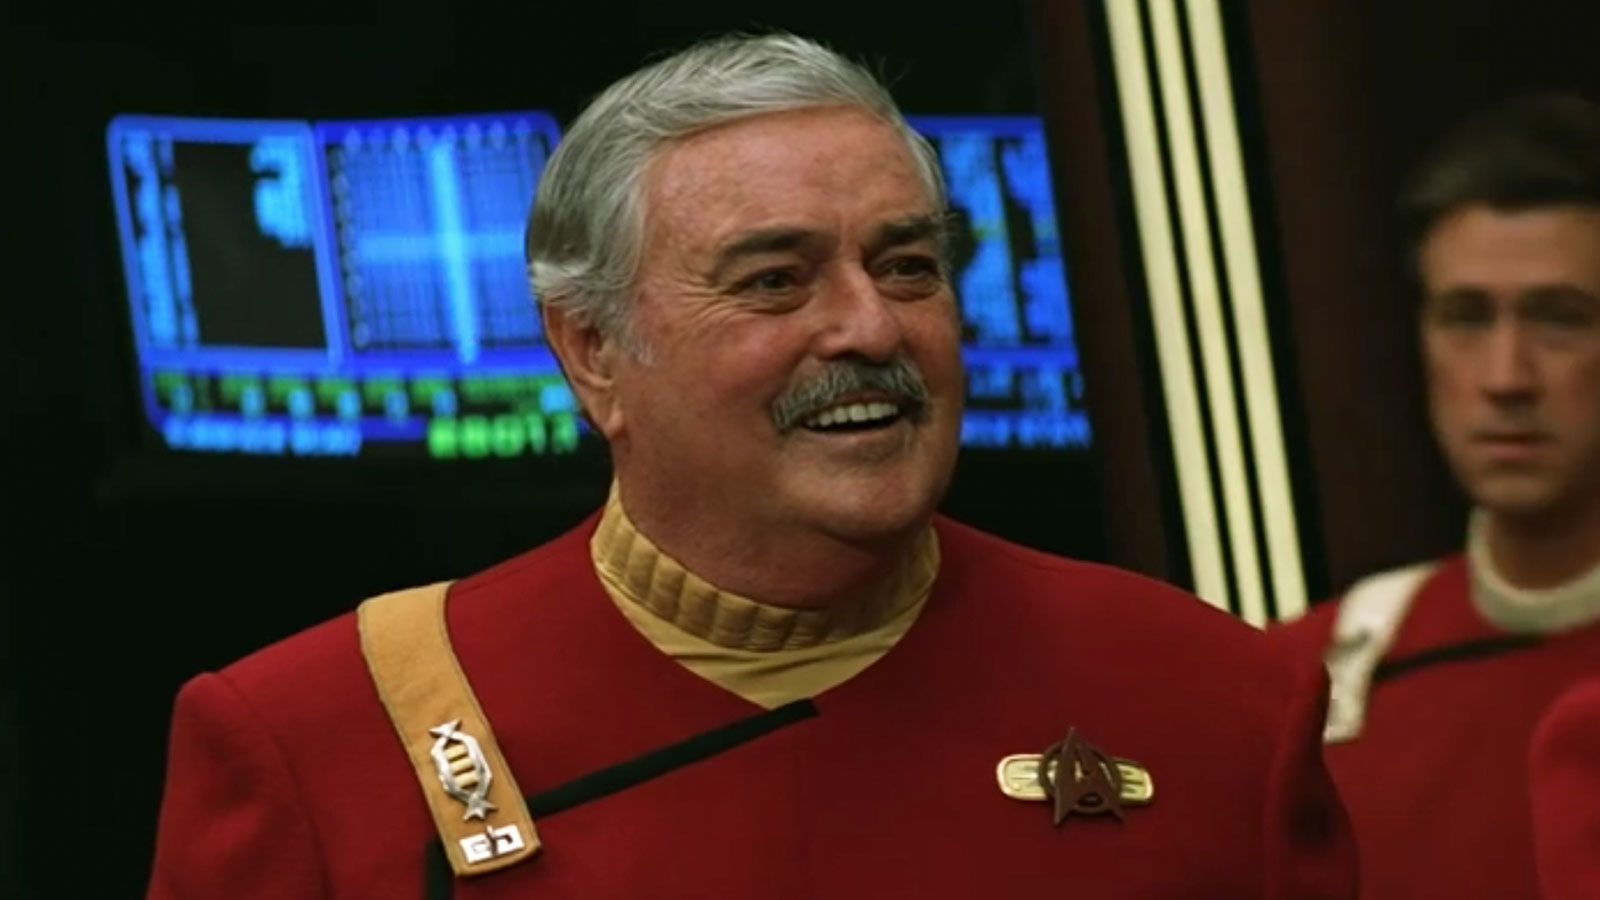 Ashes Of James Doohan, Star Trek’s Scotty, Were Smuggled Aboard The International Space Station 12 Years Ago